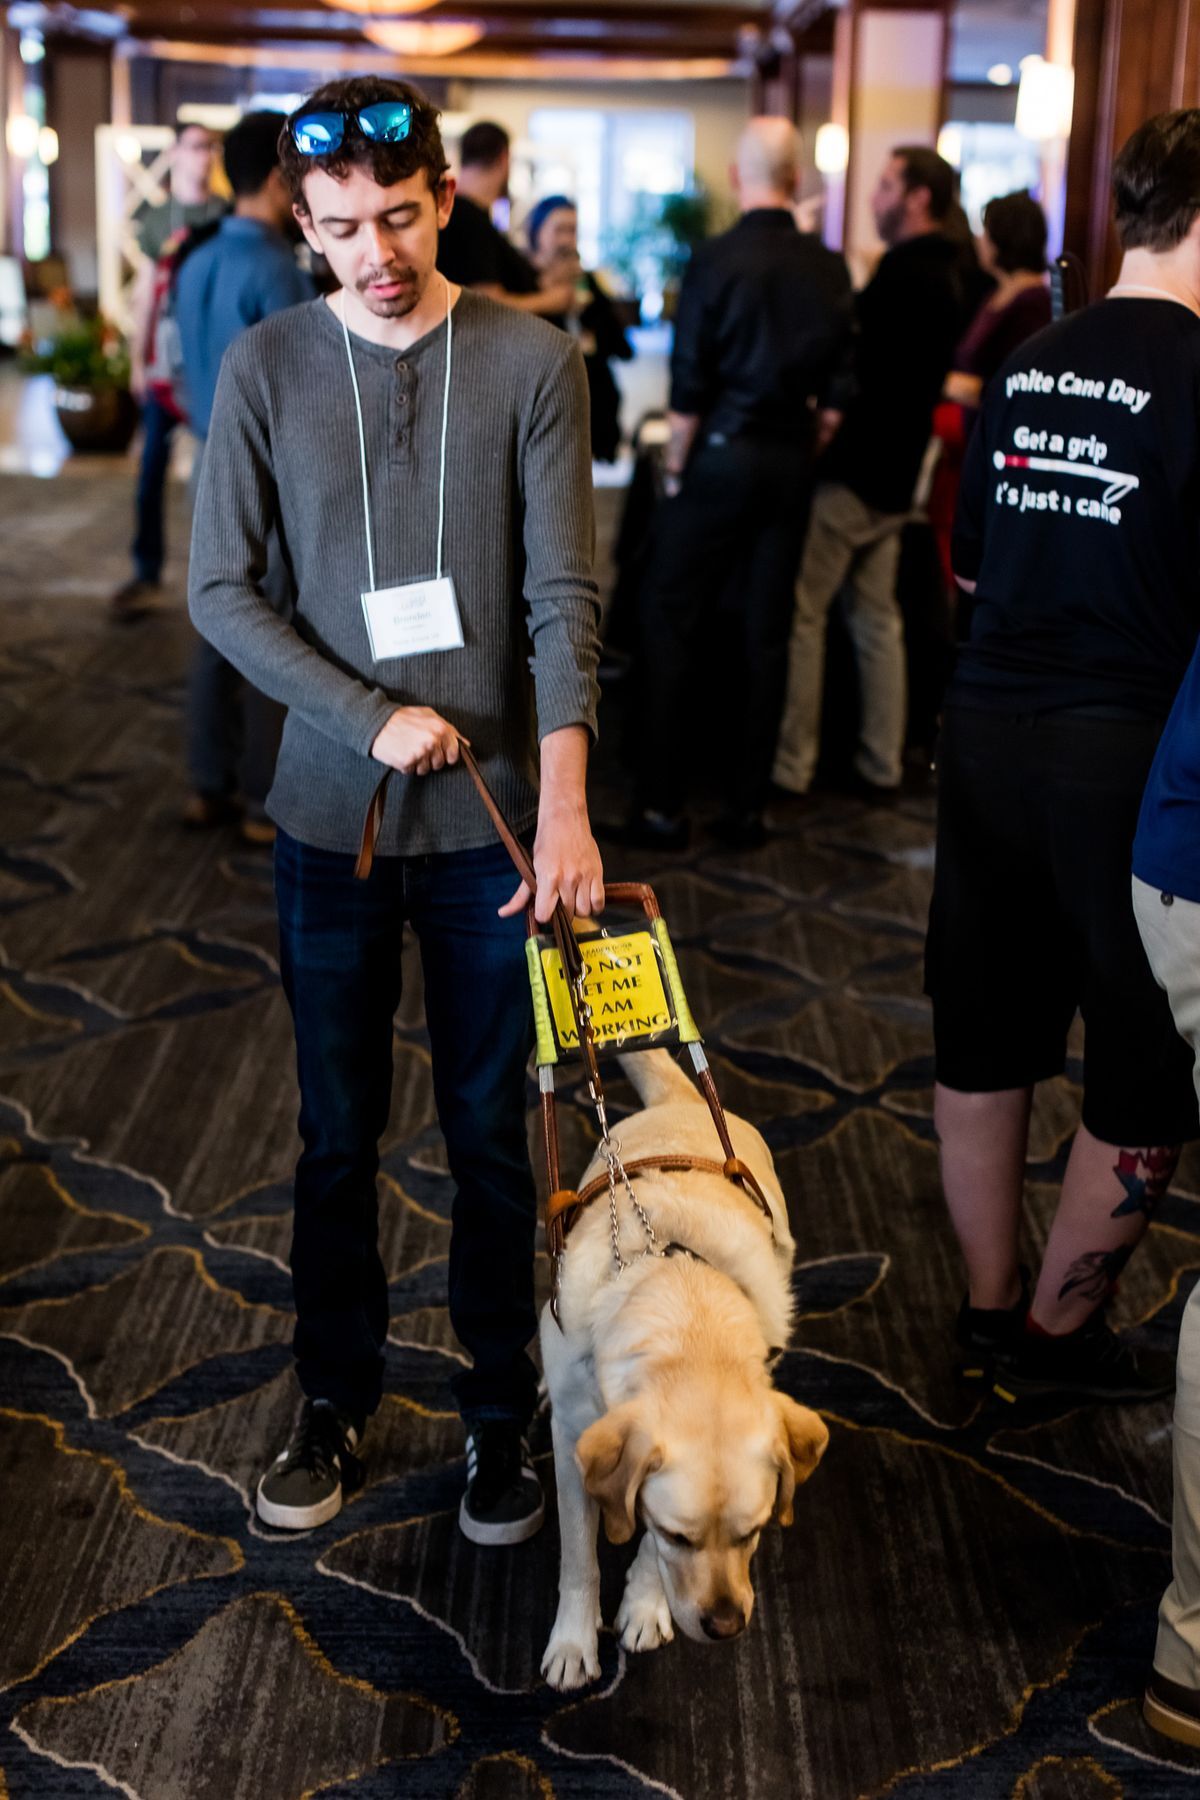 A young man with brown hair, wearing a grey shirt and black pants is holding his guide dog's harness. His guide dog is a yellow golden retriever. 